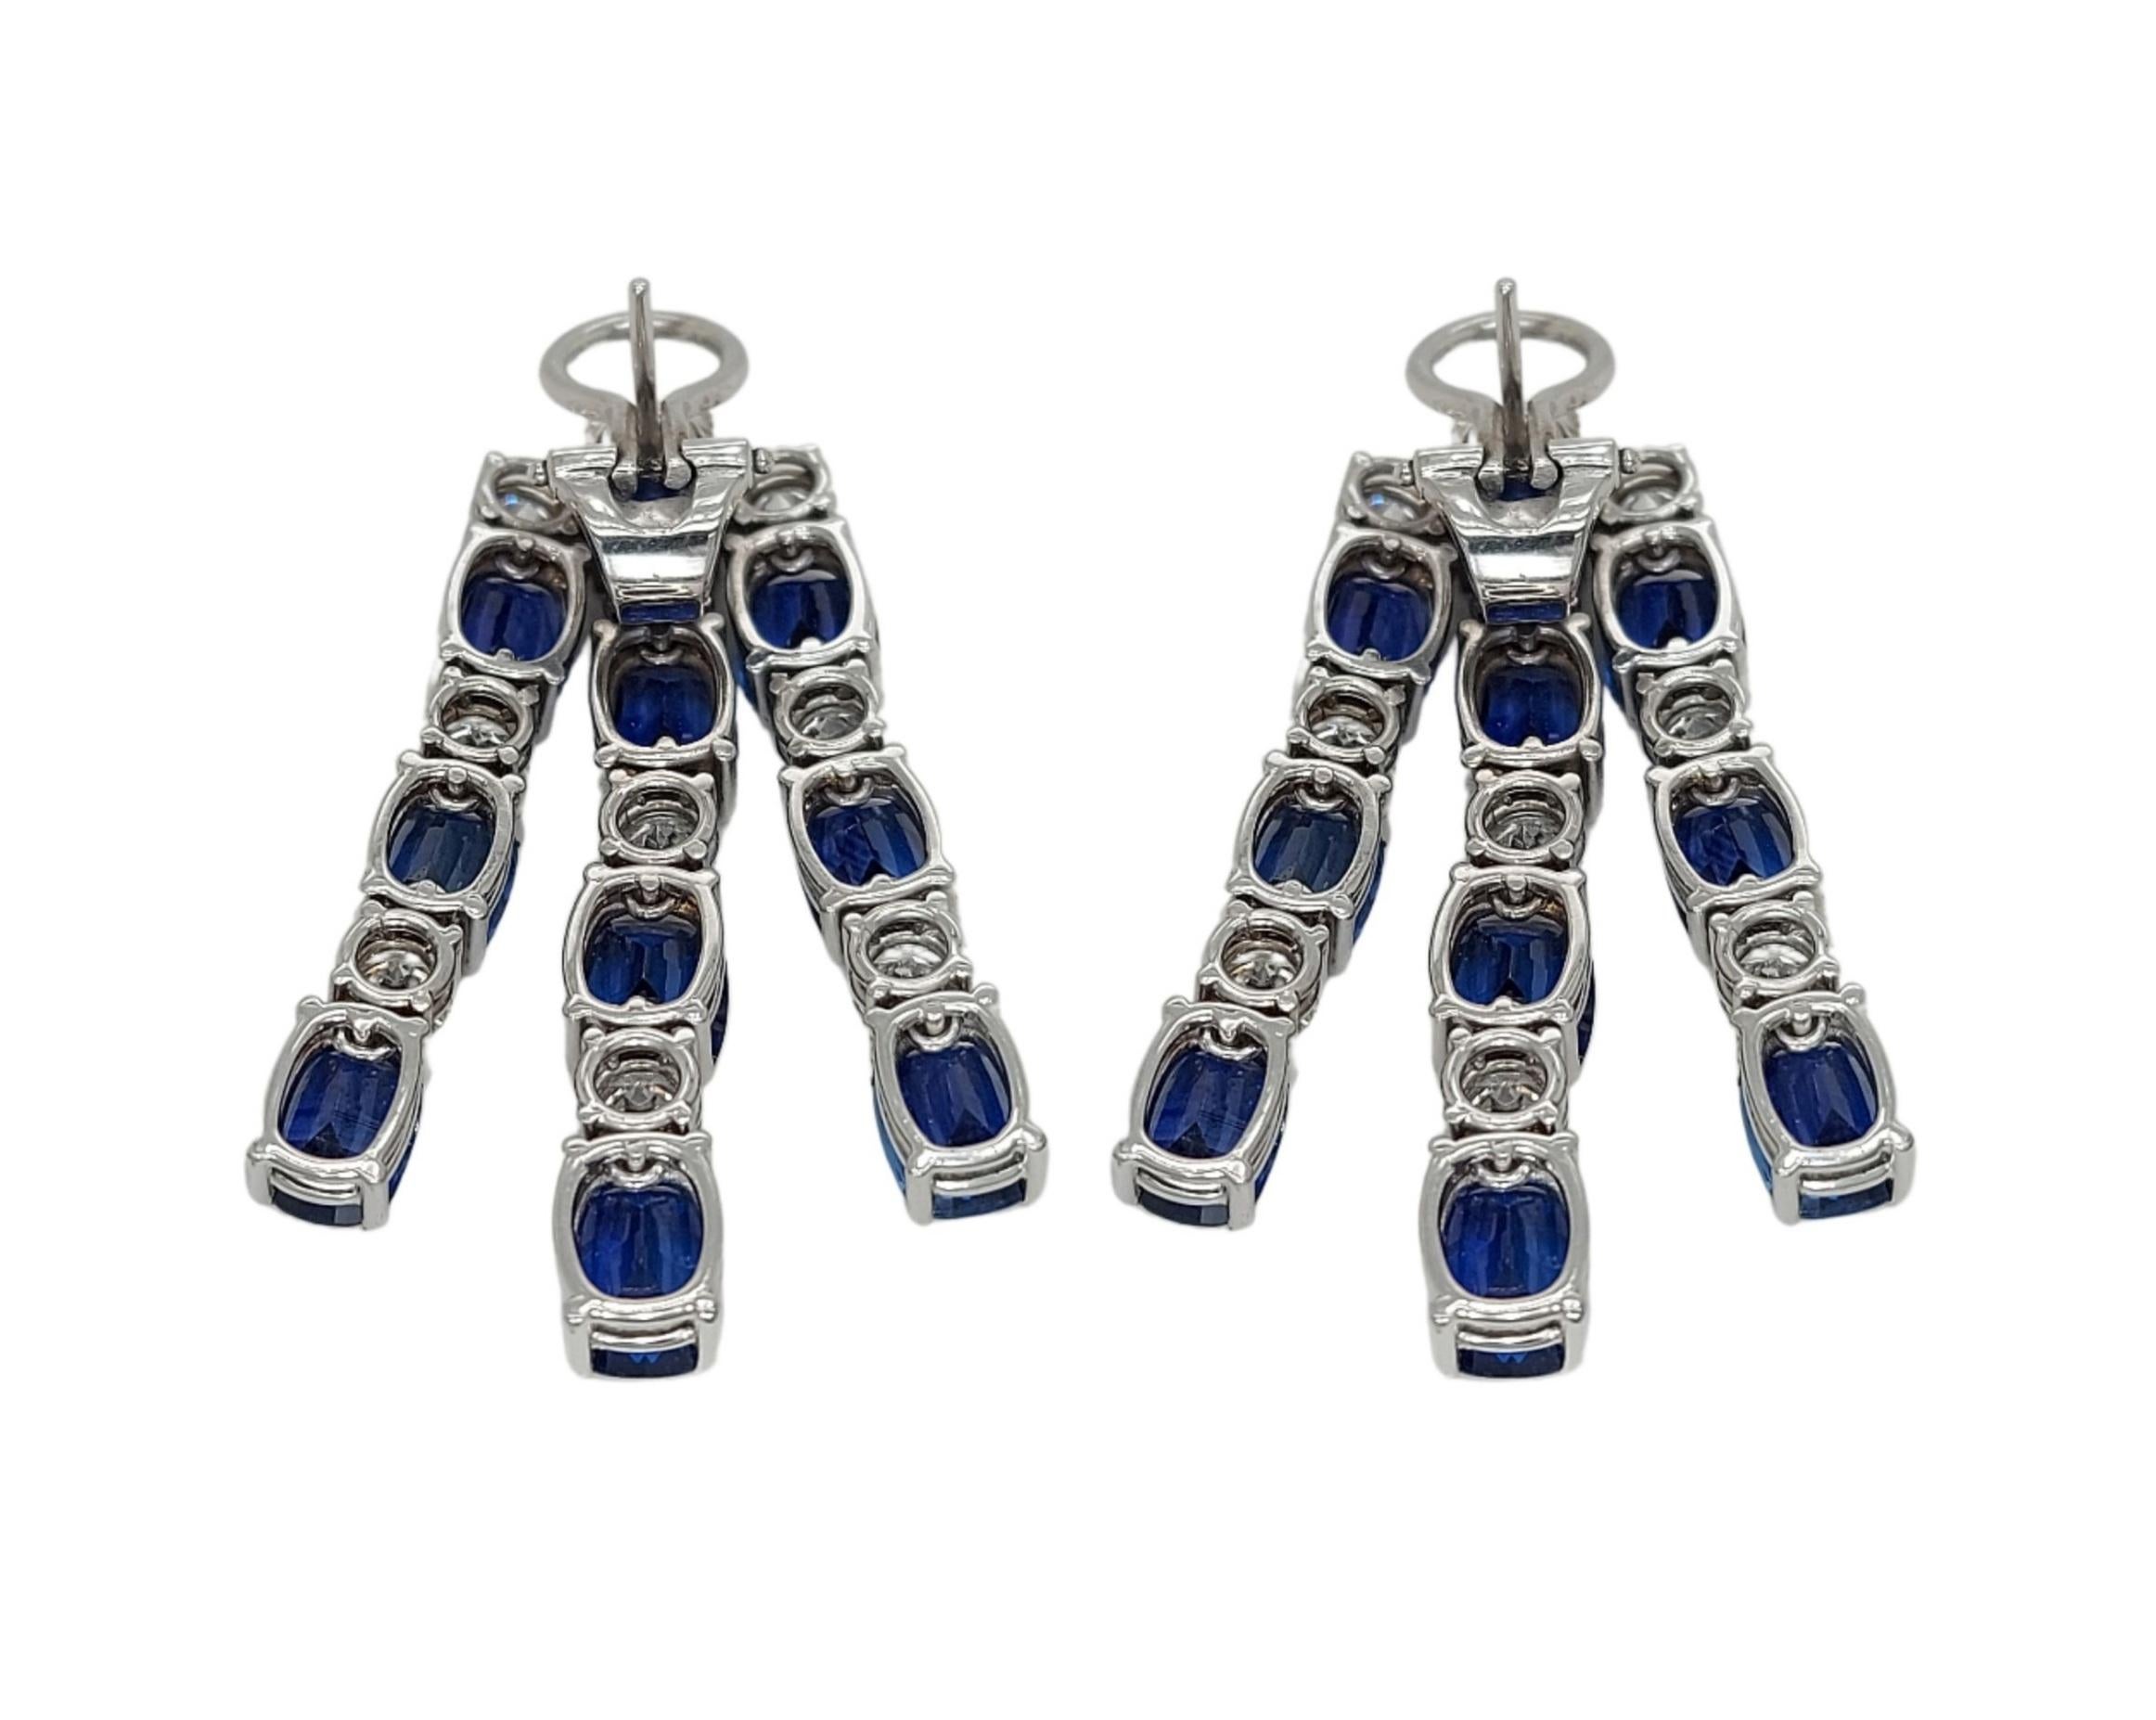 18kt White Gold Earrings with 21.42ct Sapphires, 5.09ct Diamonds, CGL Certified For Sale 1